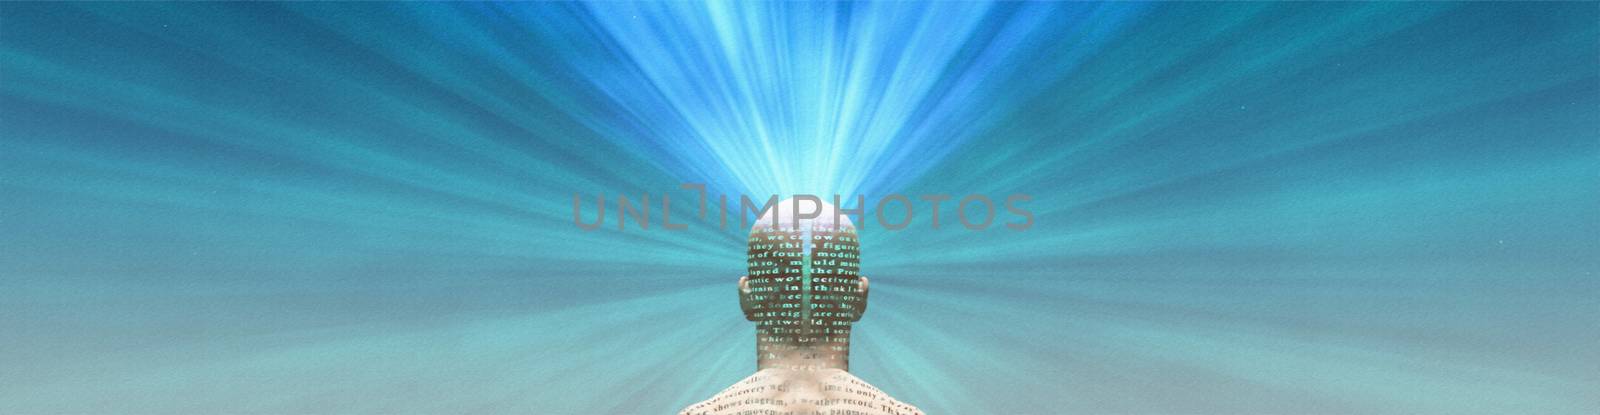 The Power of Mind. Man radiates light from head